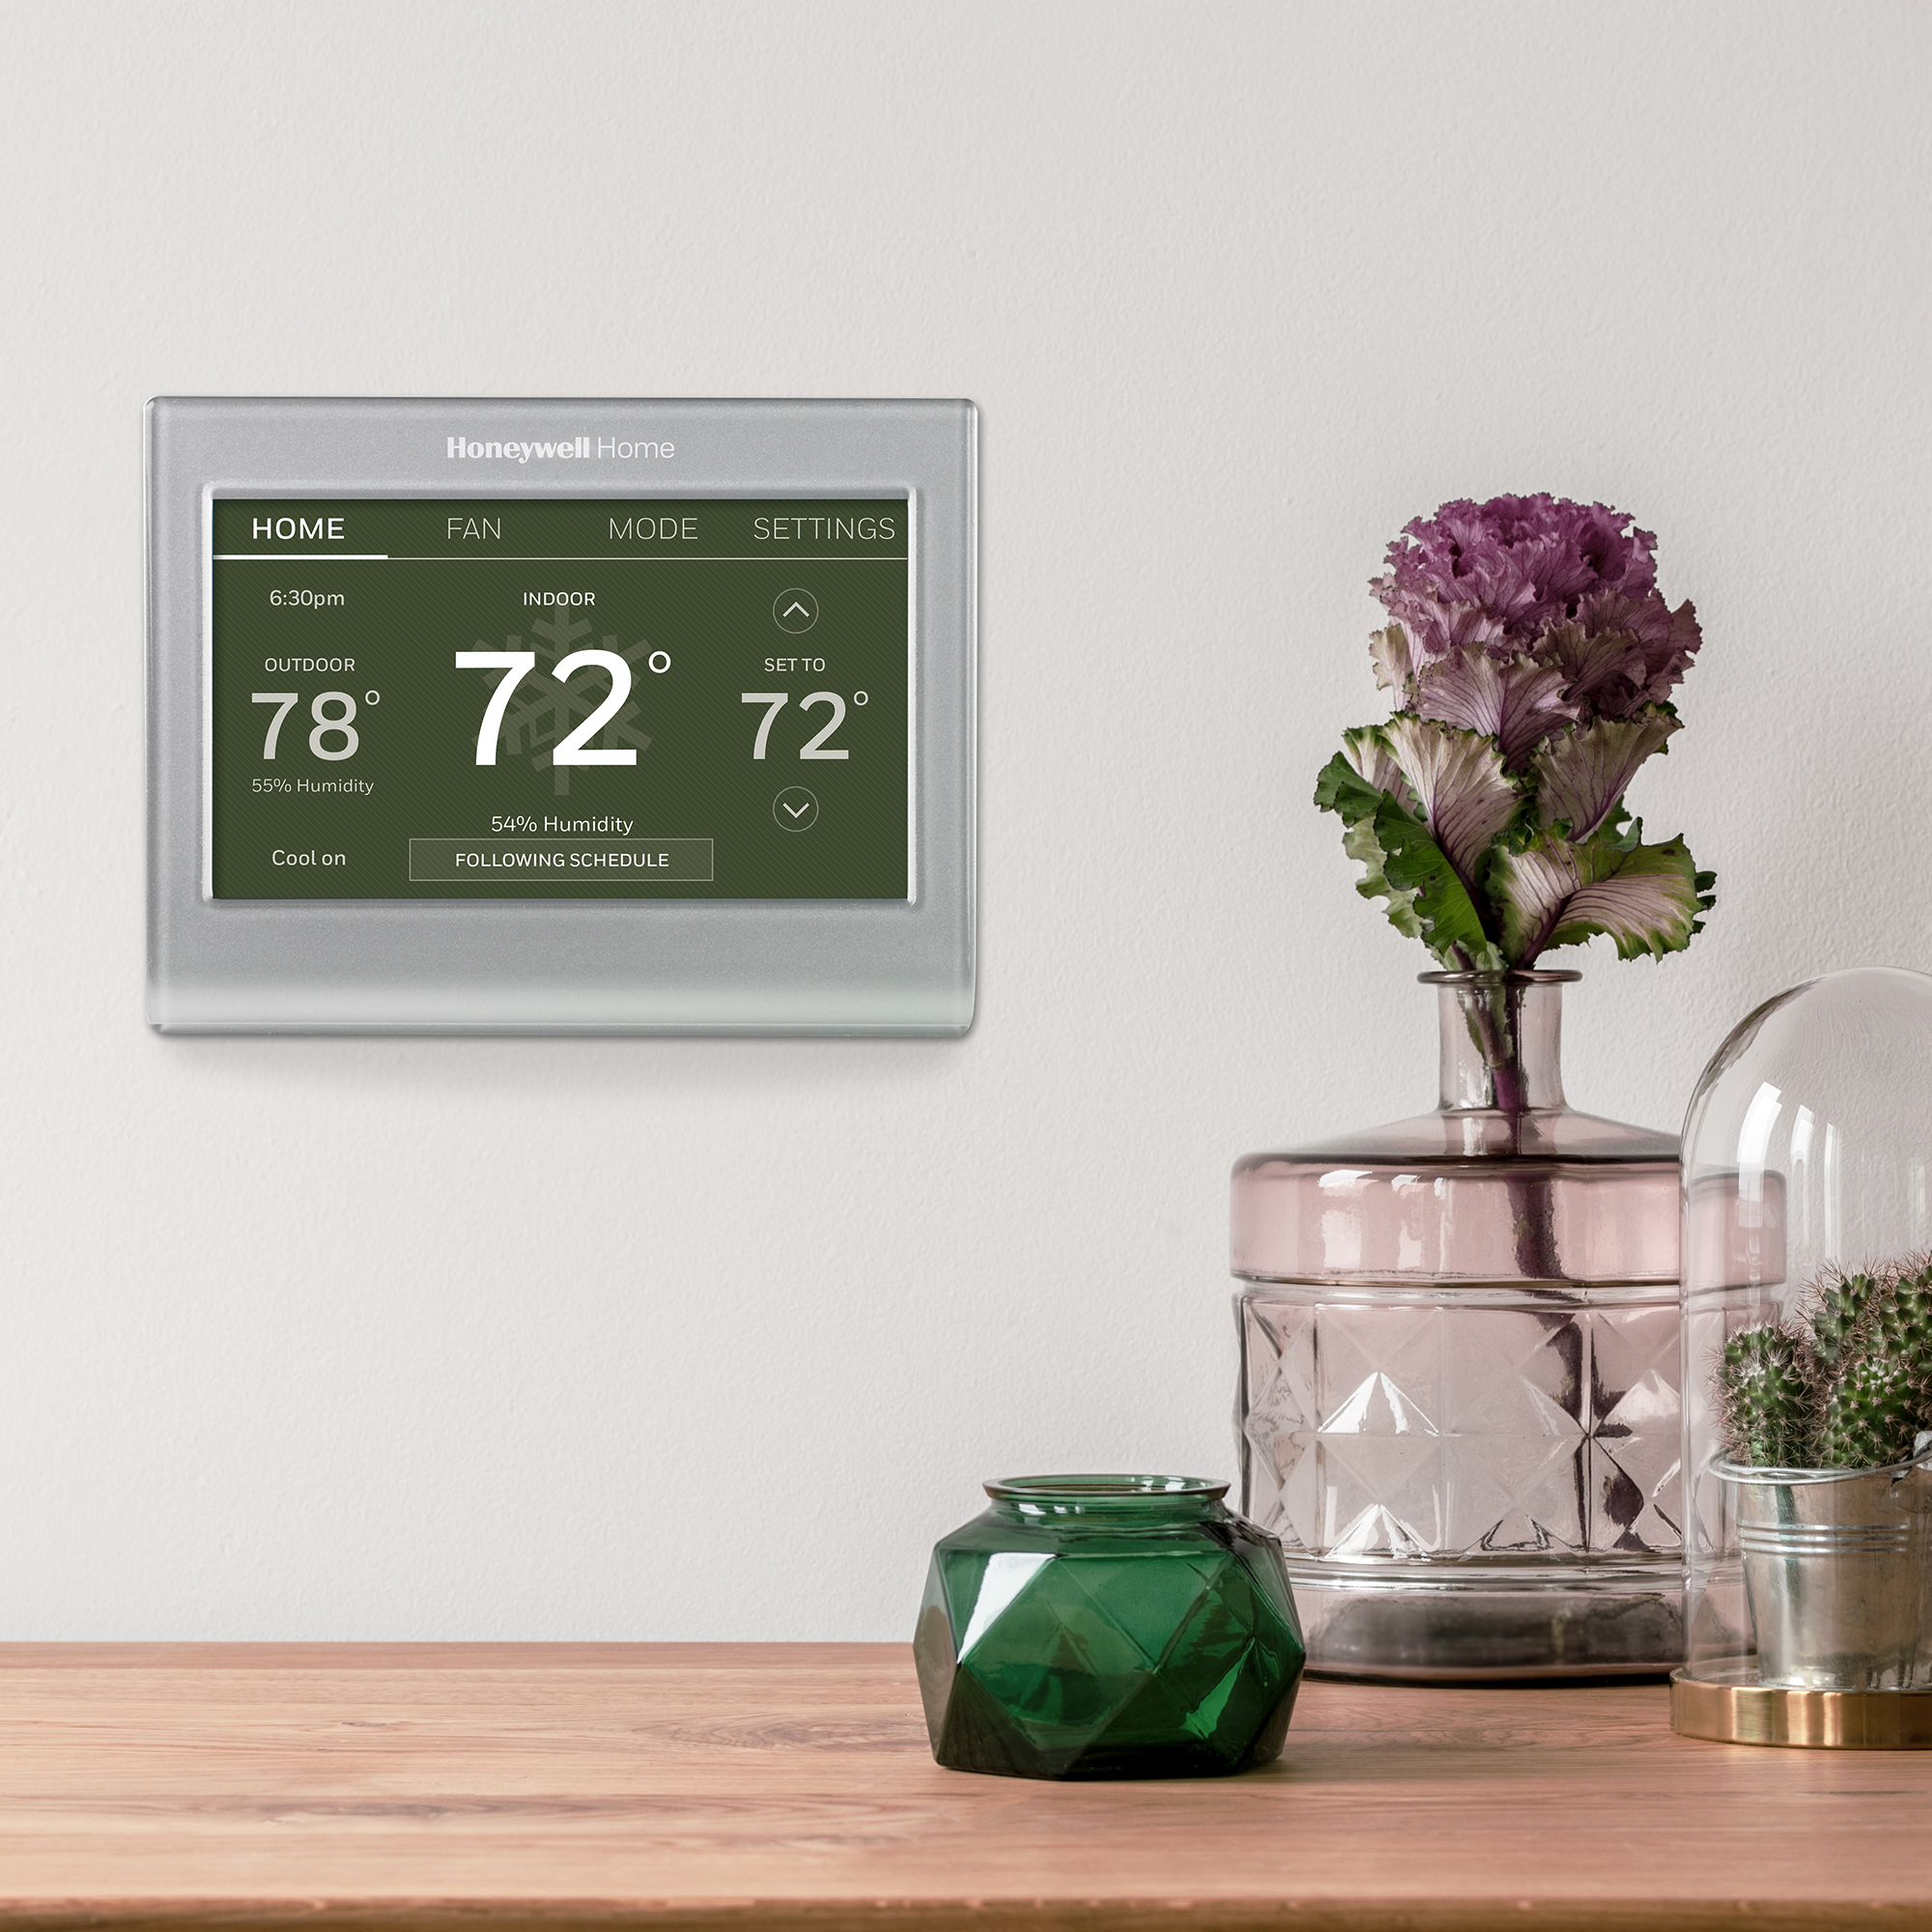 Honeywell Home Smart Color Thermostat - image 4 of 16